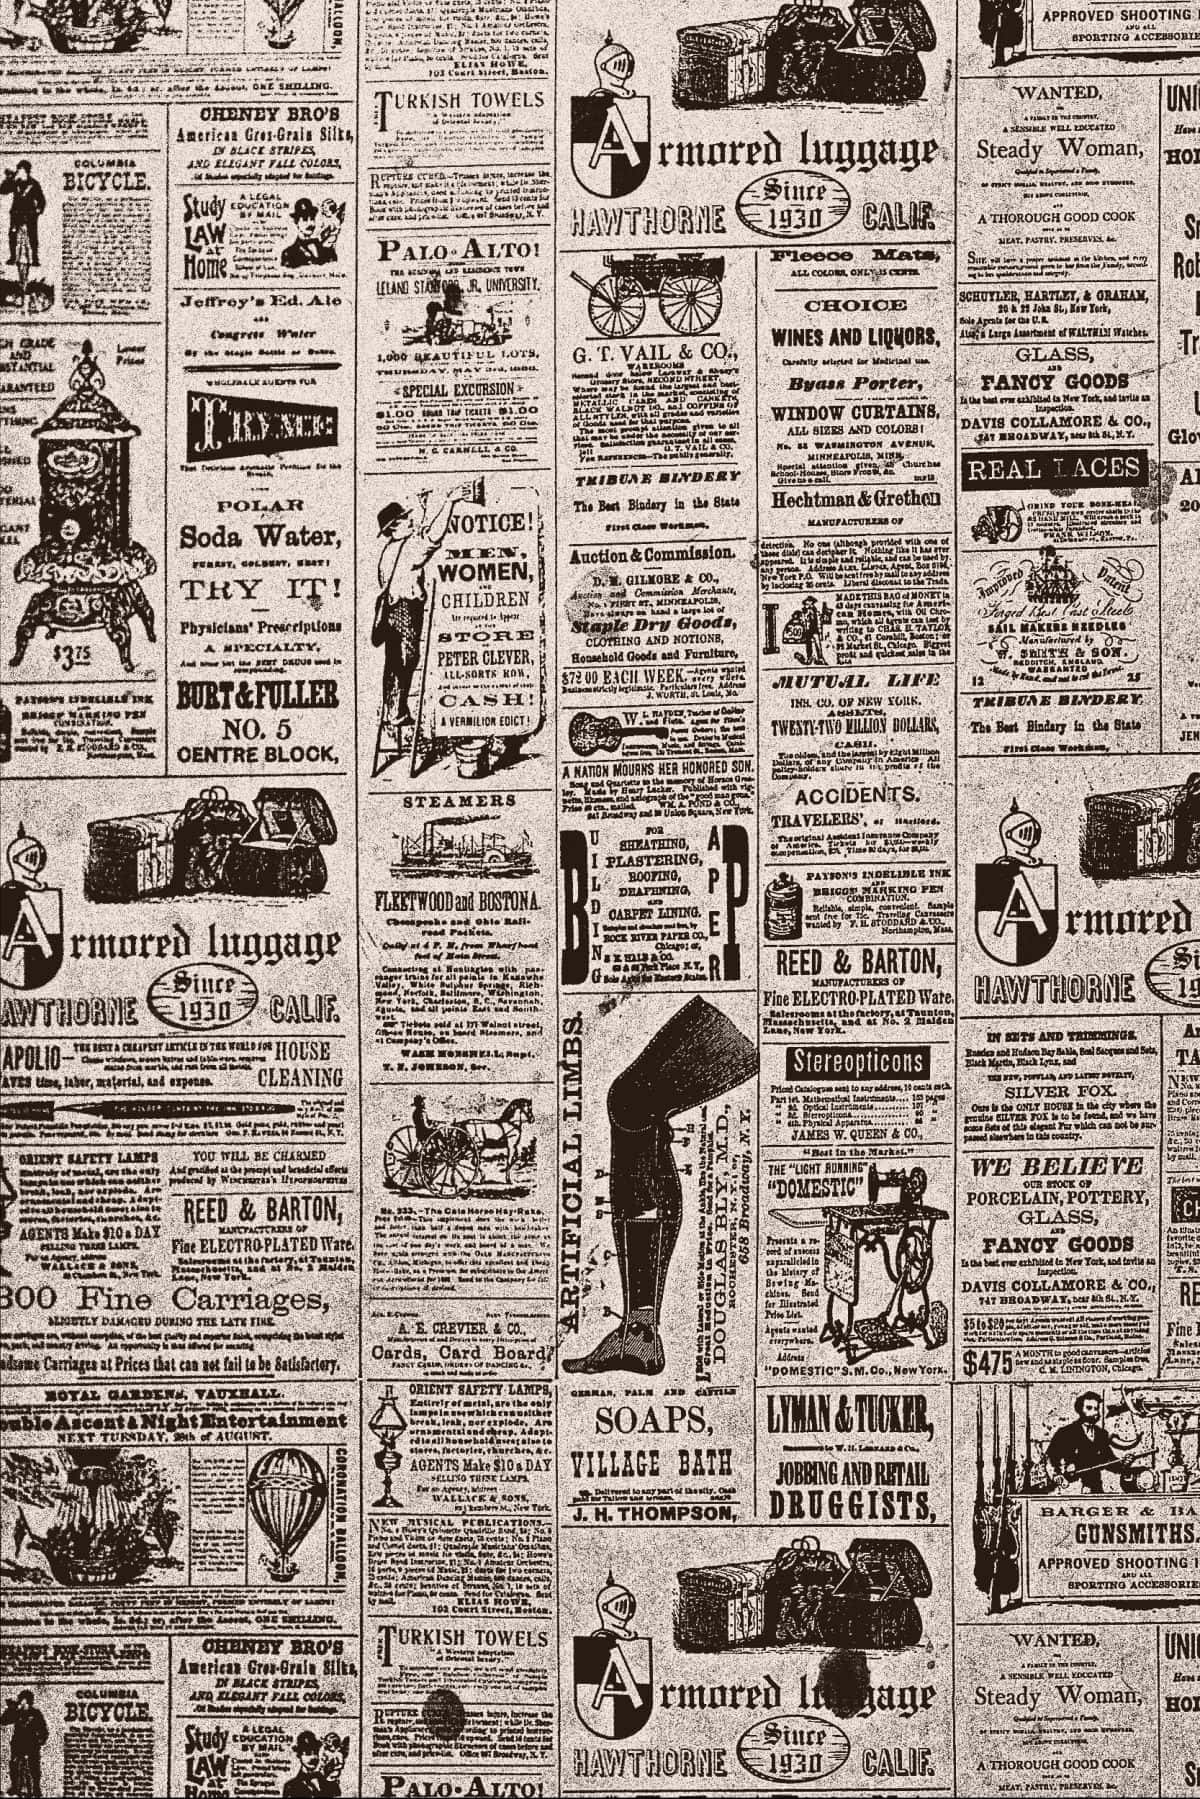 A Vintage Stack of a Newspaper